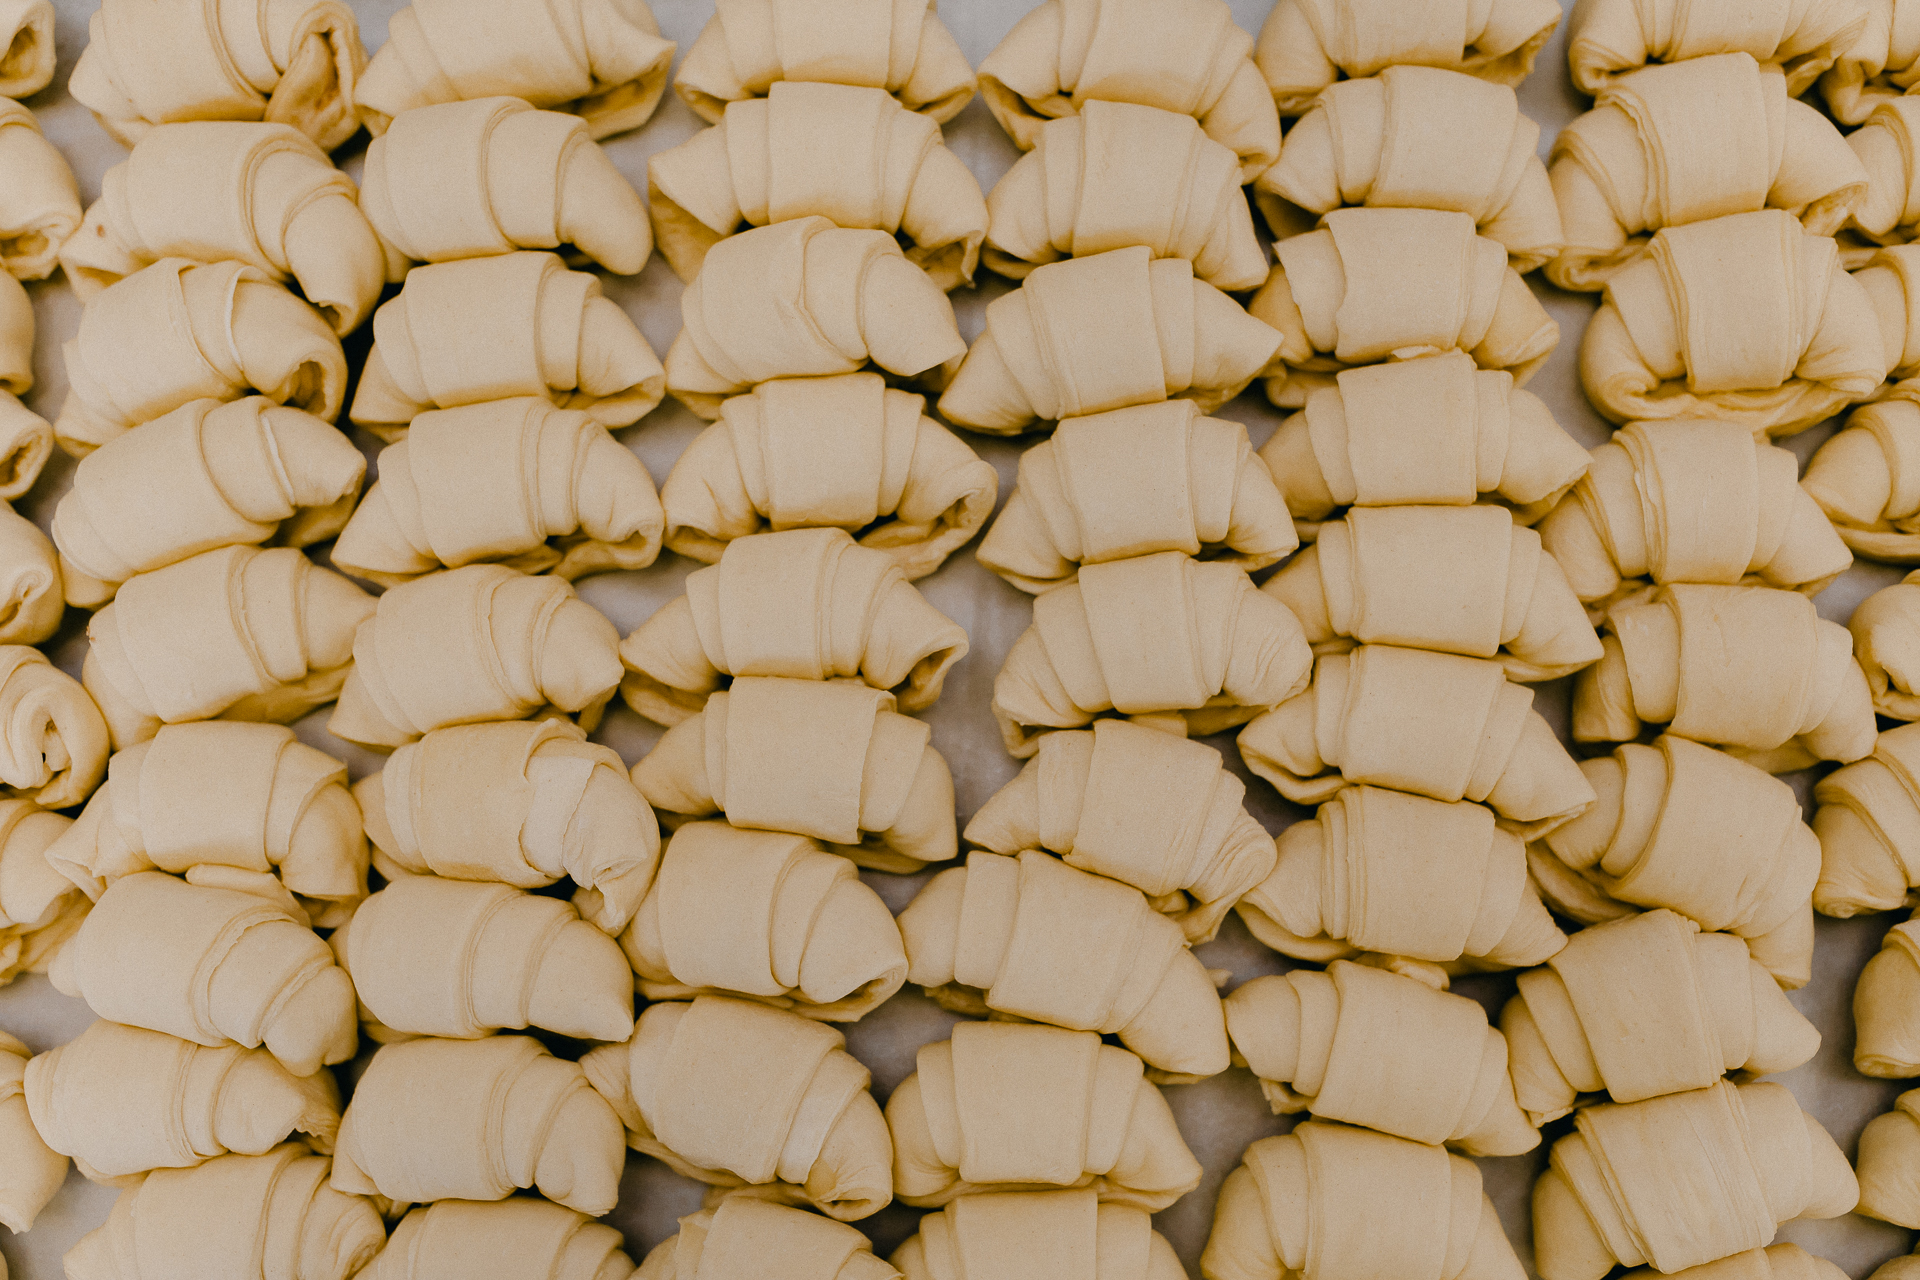 Giotto Bakery – Rows of rolled-up croissants, ready to be baked